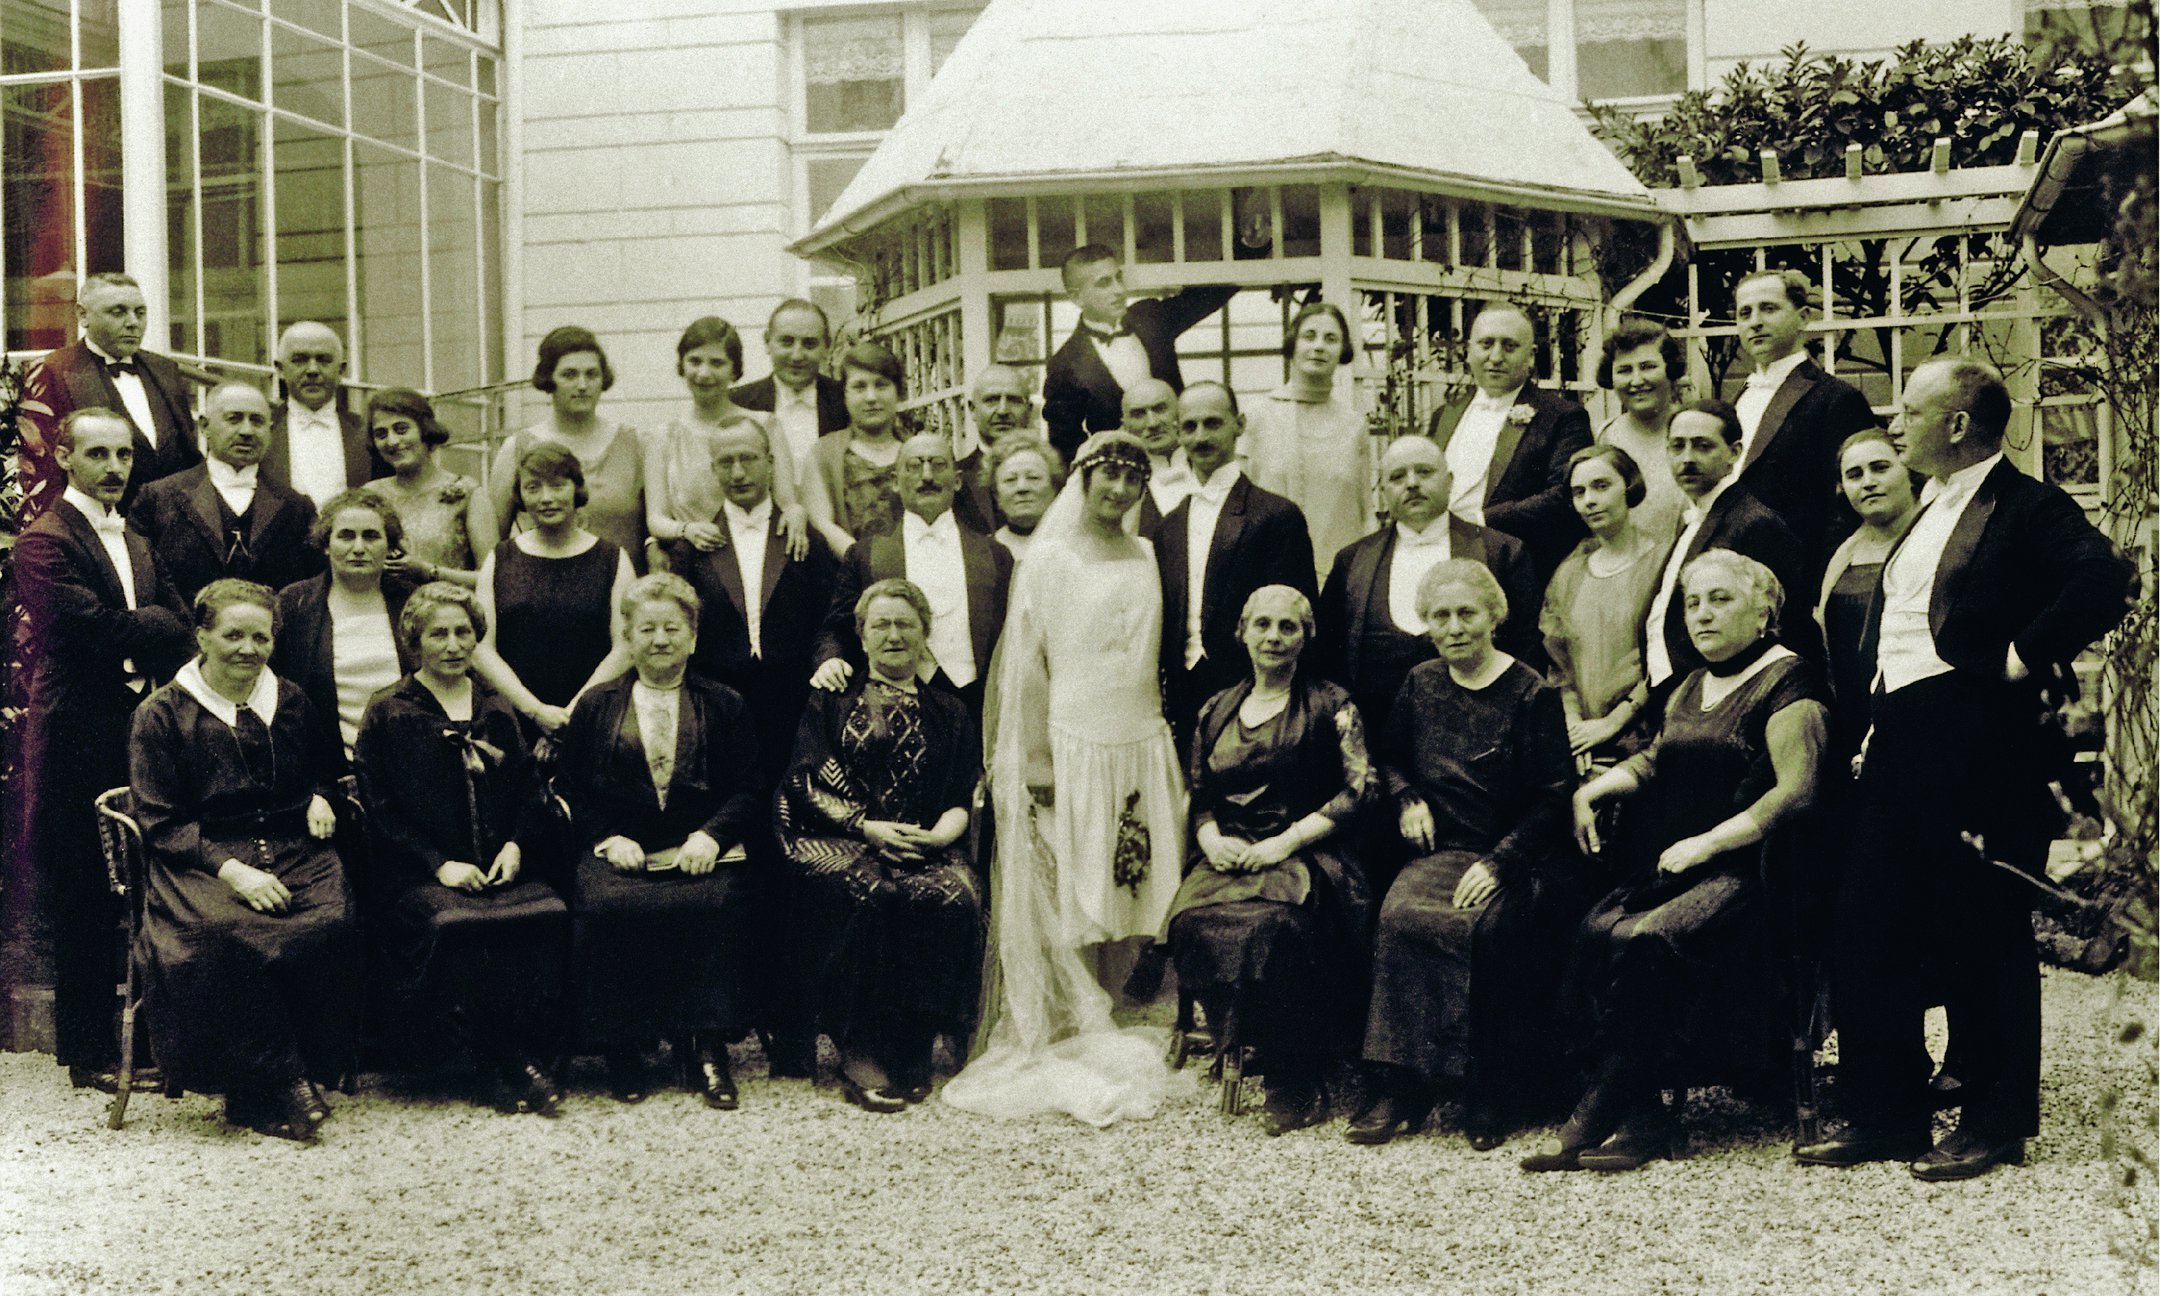 Otto and Edith Frank with their wedding guests, 12 May 1925.